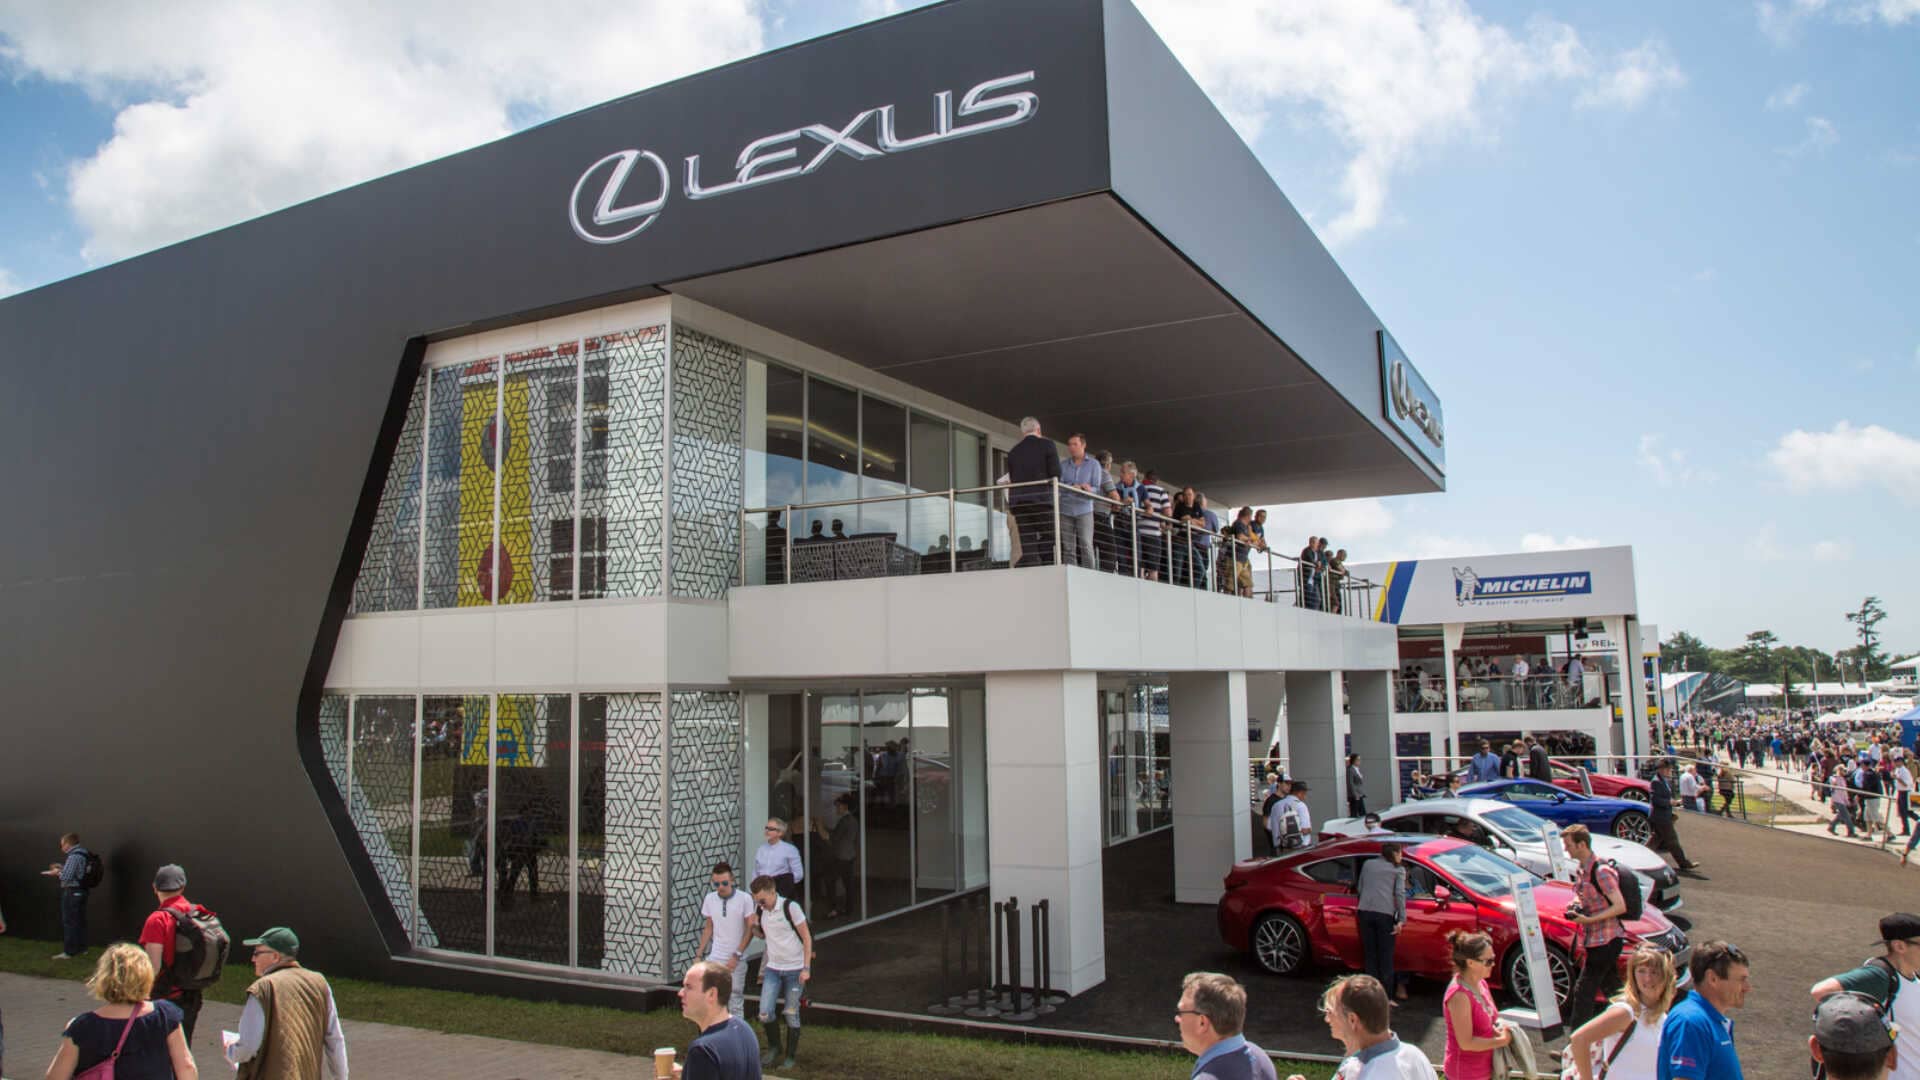 lexus exhibition with cars displayed outside